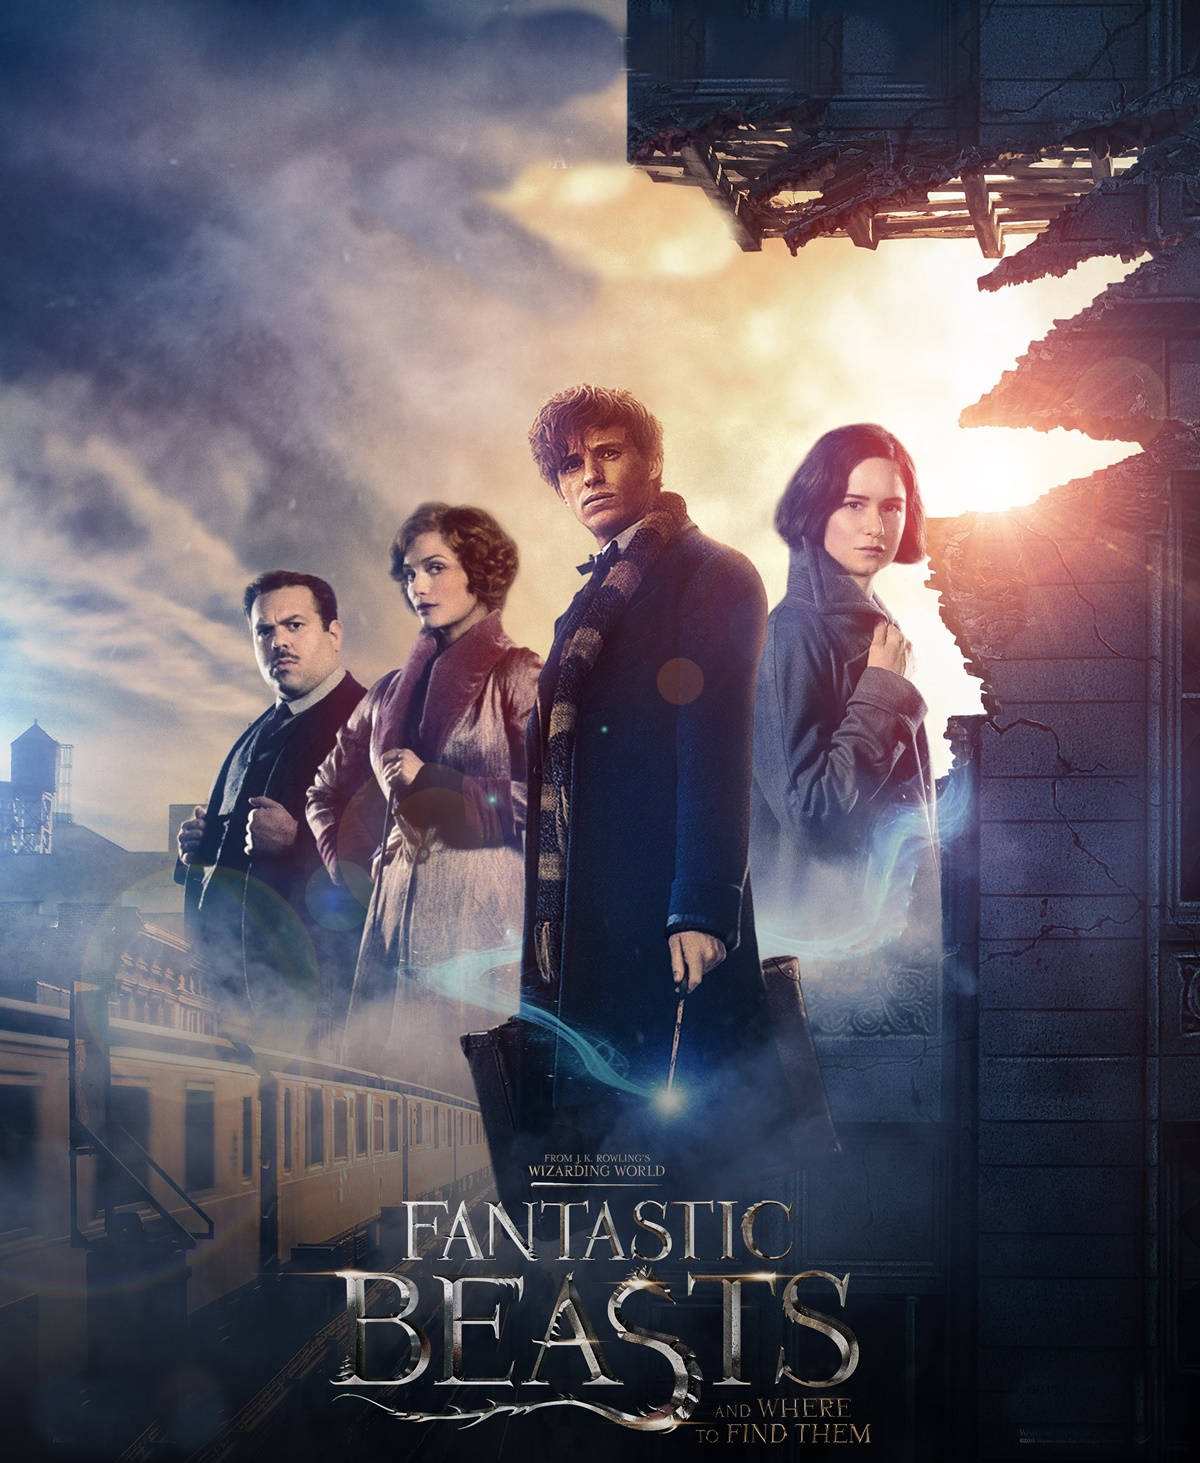 Fantastic Beasts And Where To Find Them Damaged Building Poster Wallpaper